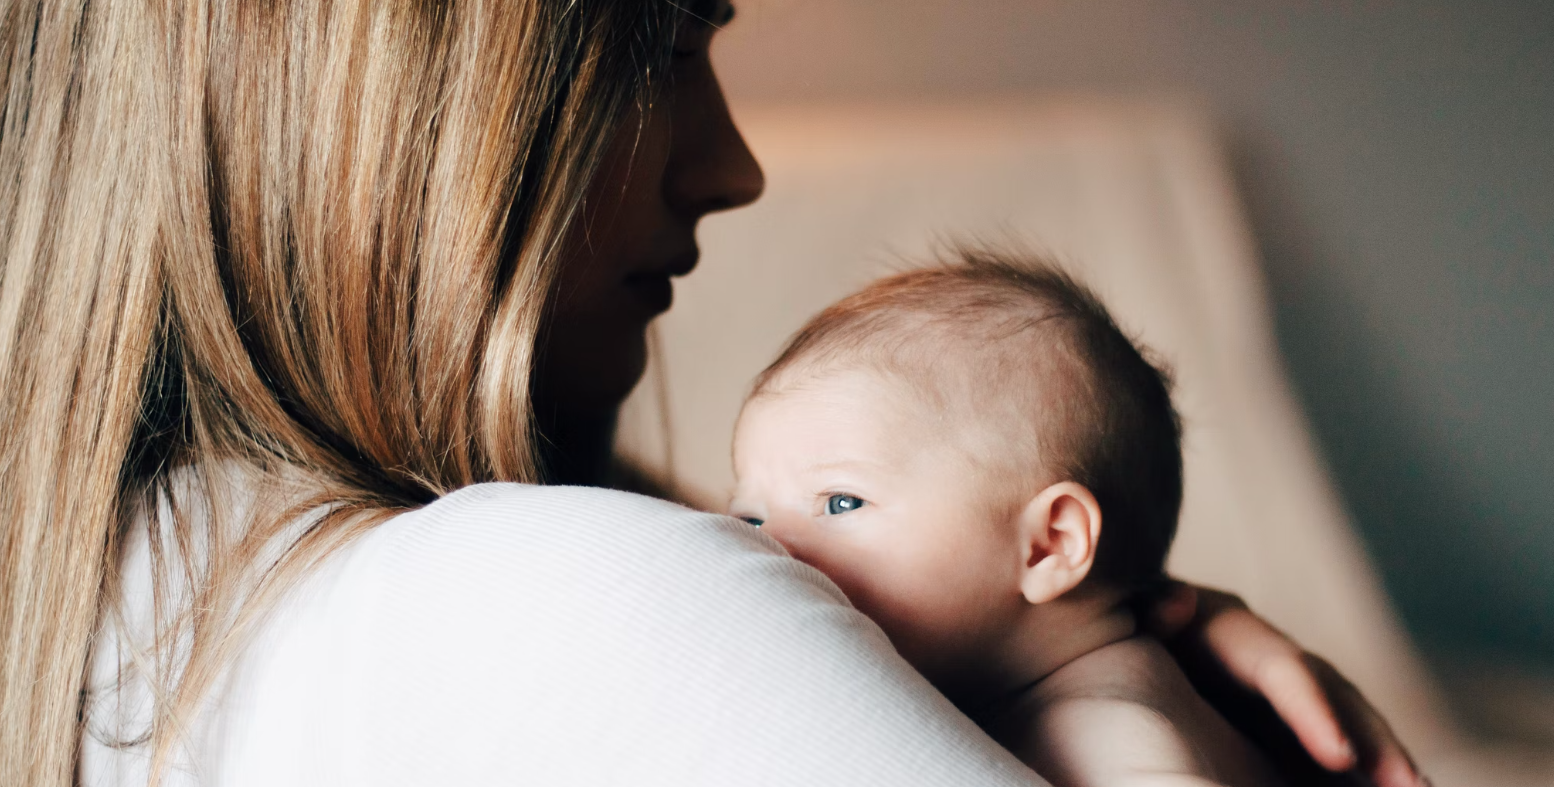 Can you breastfeed while sick?